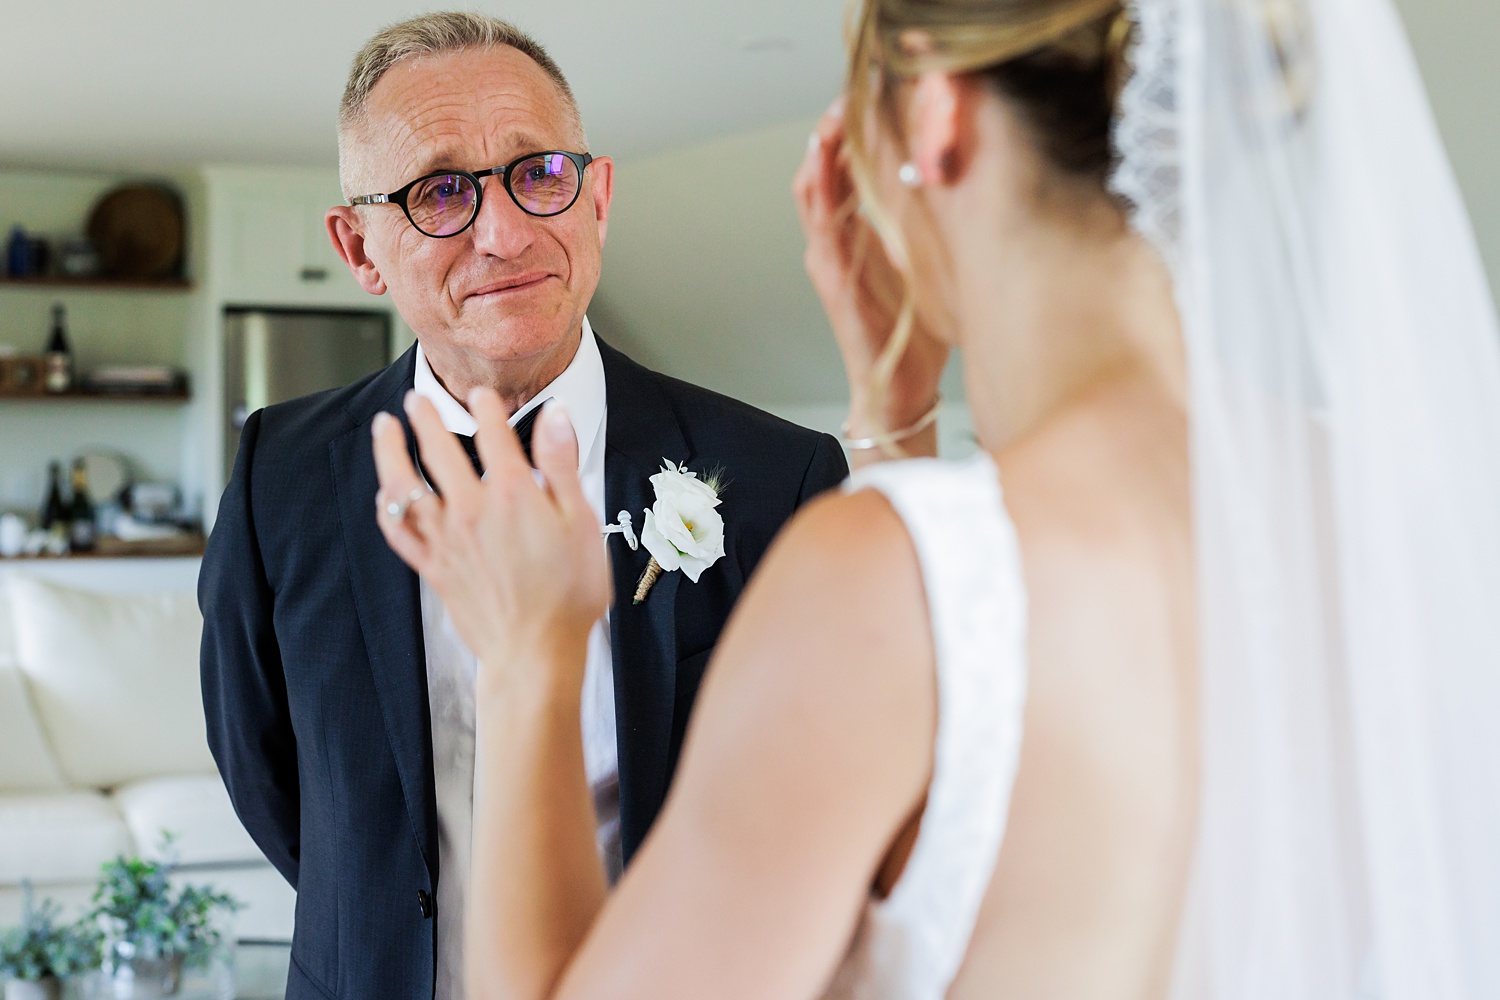 The father of the bride reacts to seeing his daughter in her dress